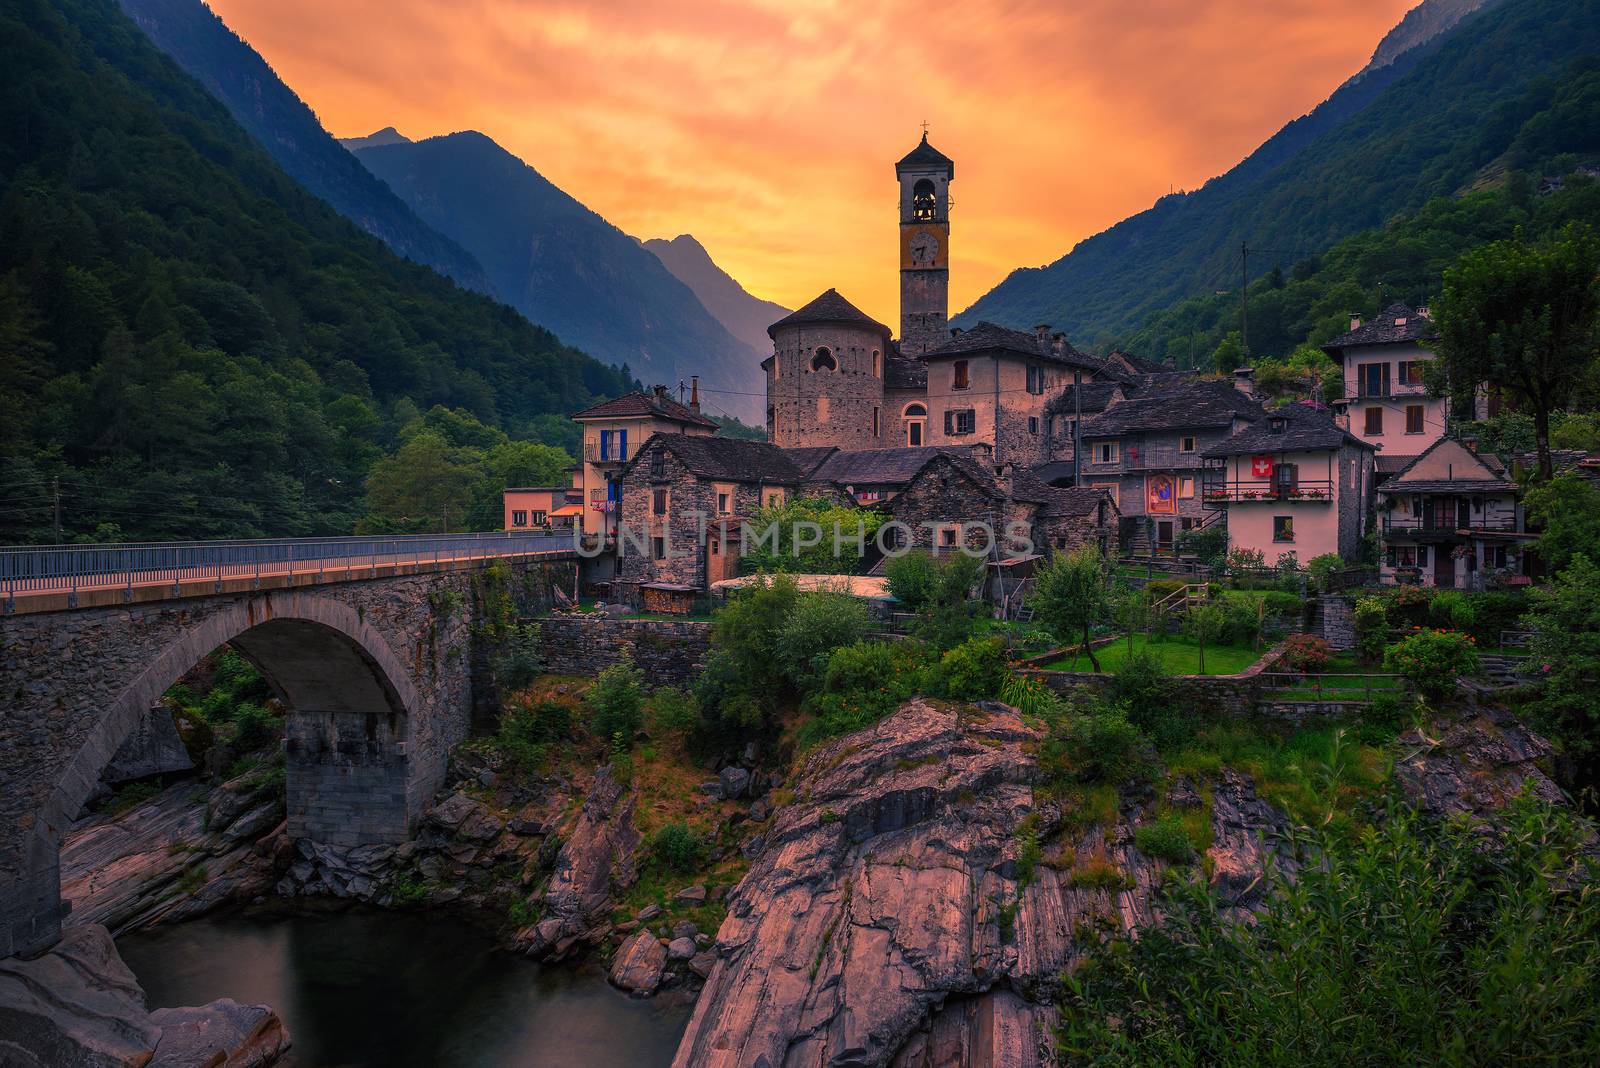 Colorful sunset above the Lavertezzo village, Papal minor Basilica and the Verzasca river in the Swiss Alps, Canton Tessin, Switzerland